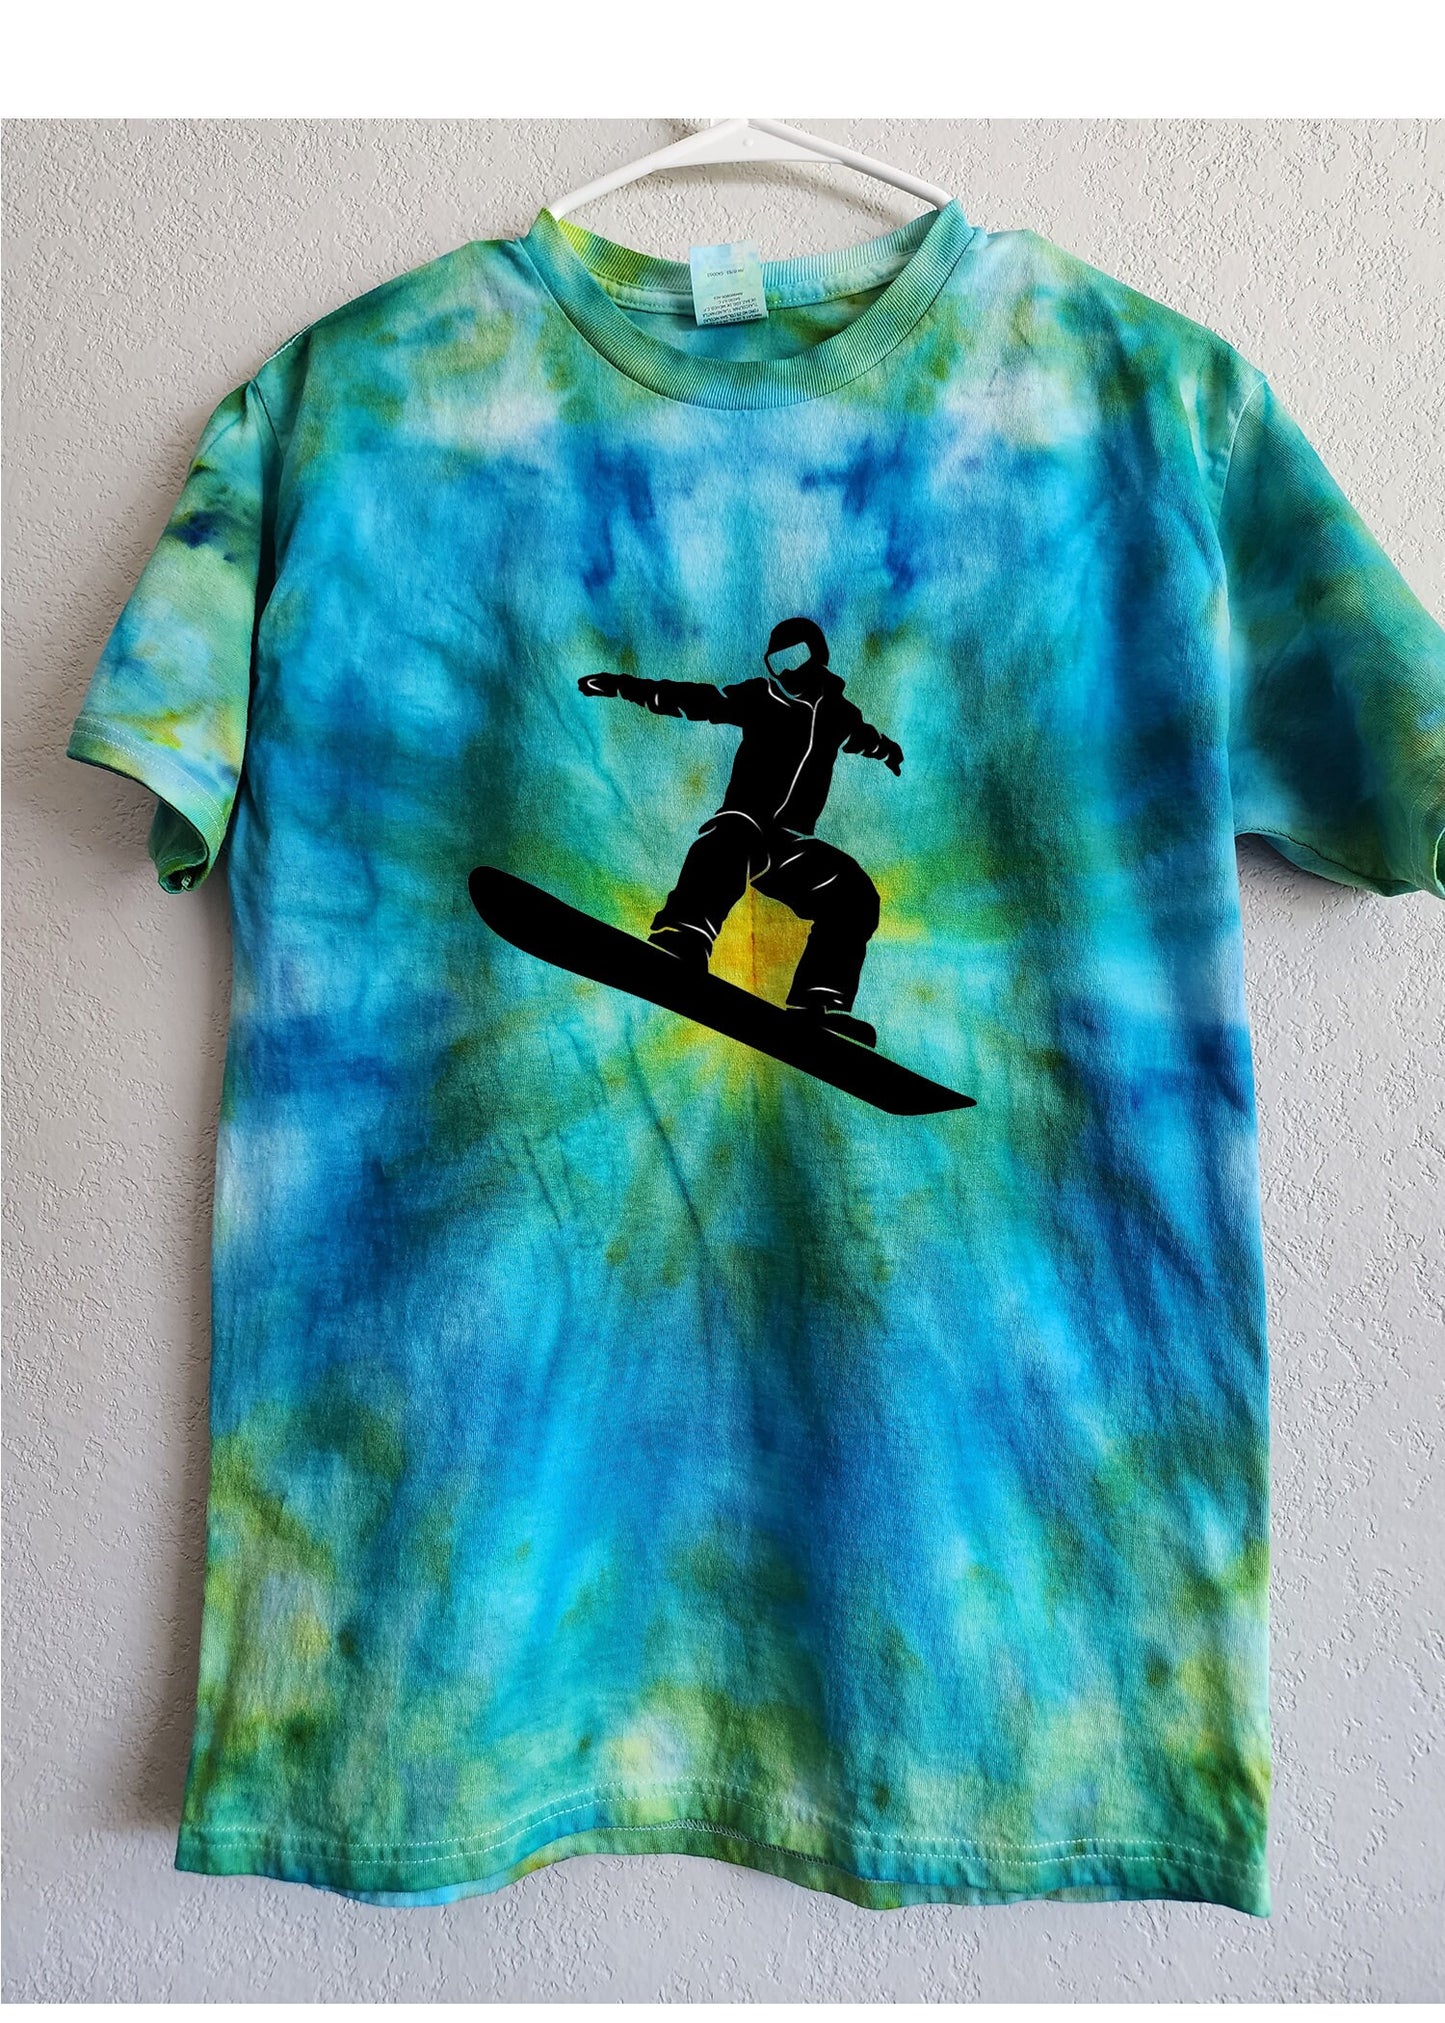 Kid's Blue Green with Star Tie Dye T Shirt Customizable Size Youth XL